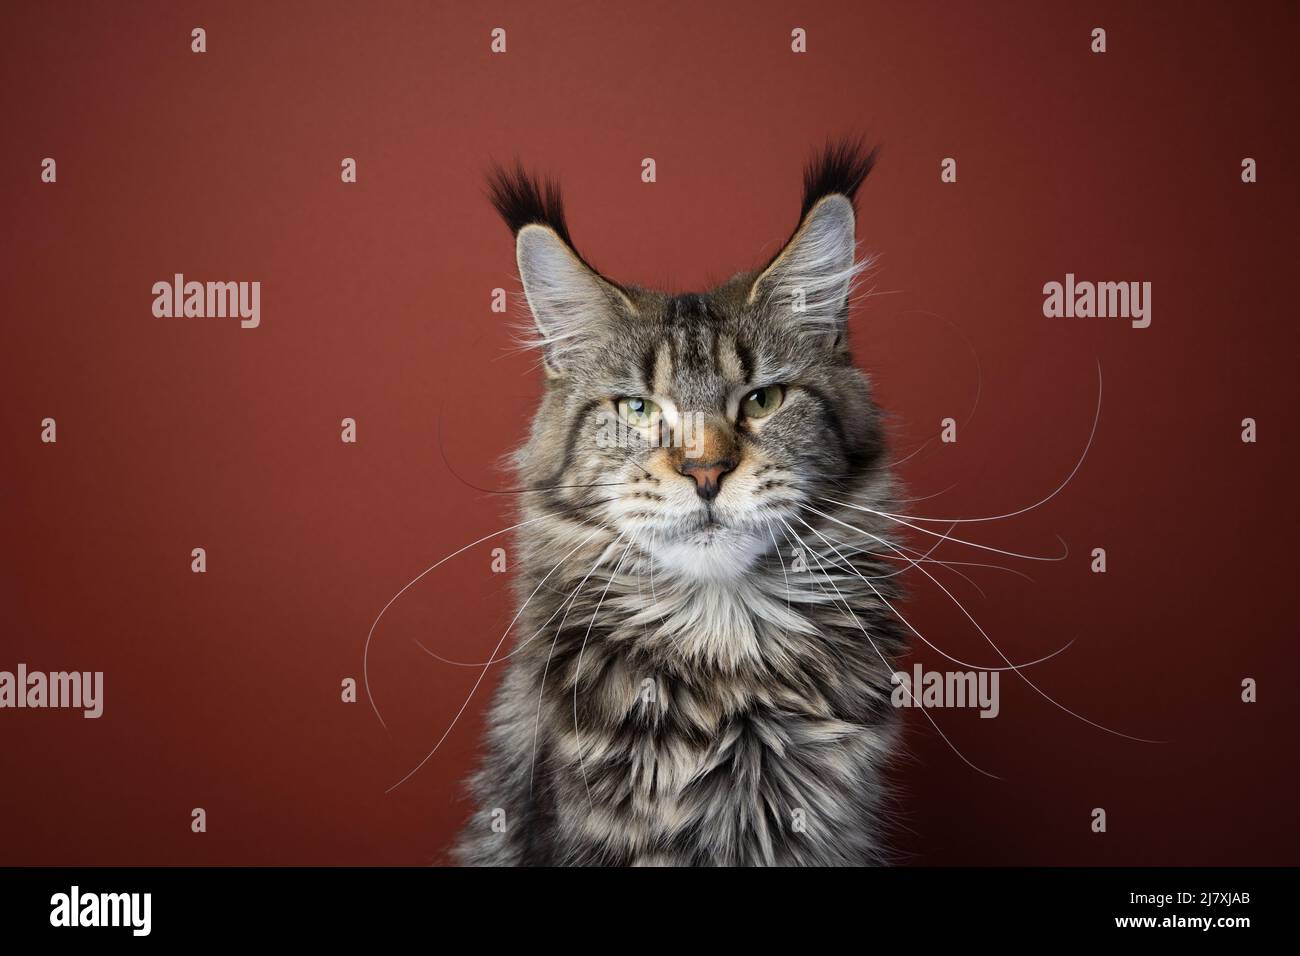 tabby maine coon cat with long whiskers looking at camera portrait on red brown background Stock Photo